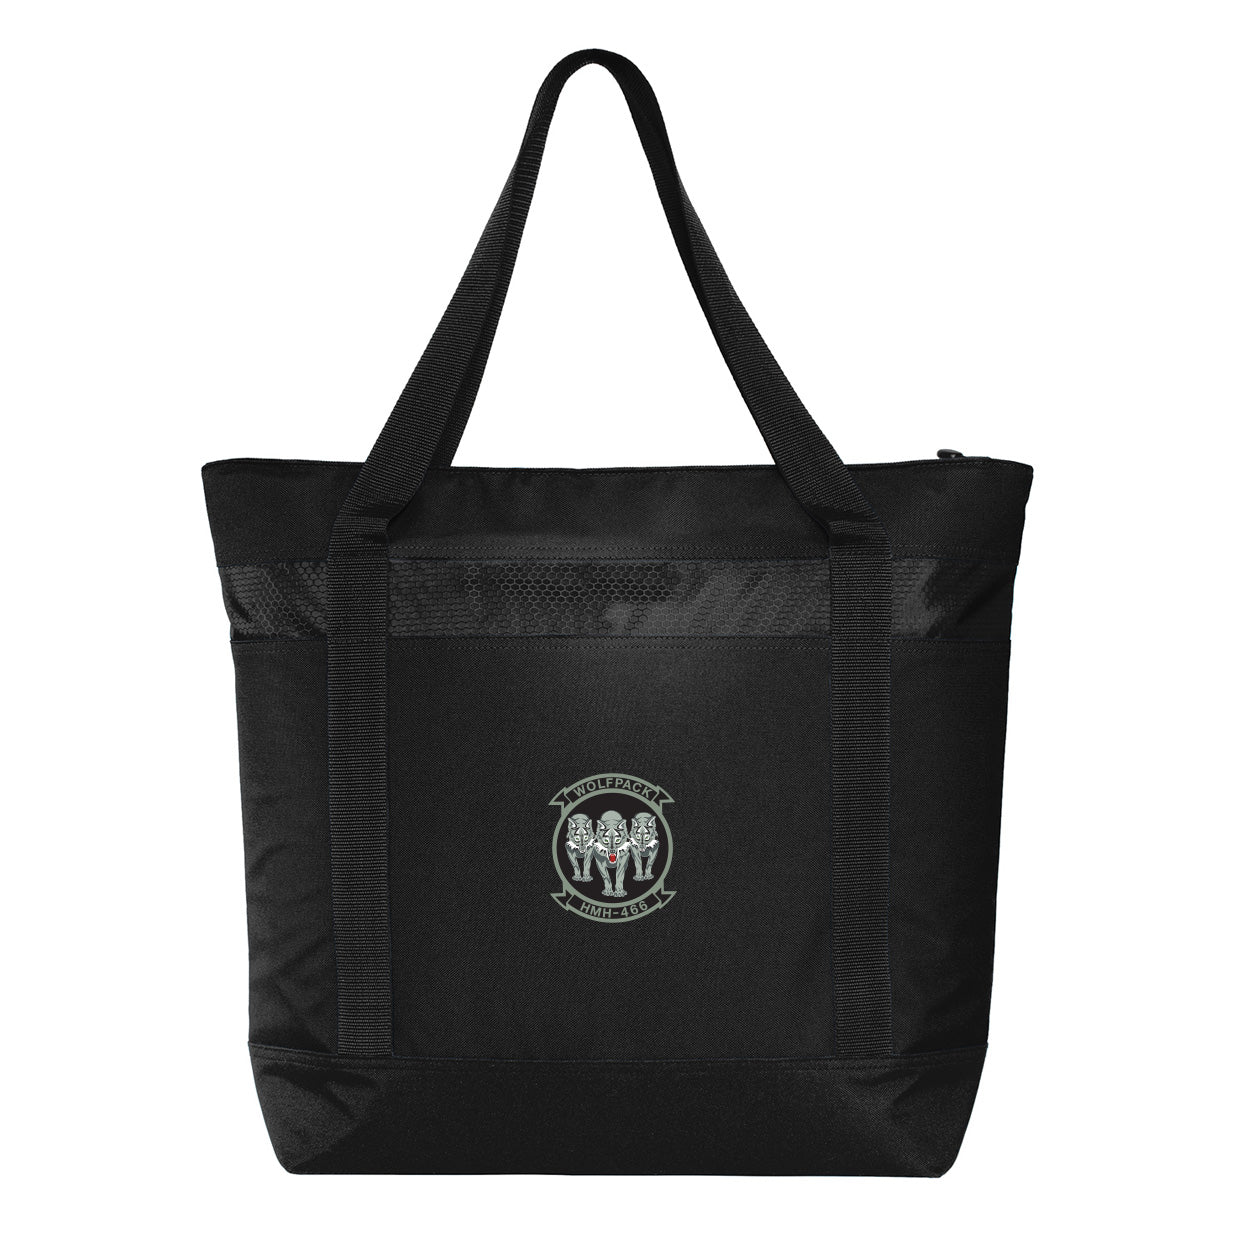 HMH-466 OFFICIAL PATCH LARGE TOTE COOLER